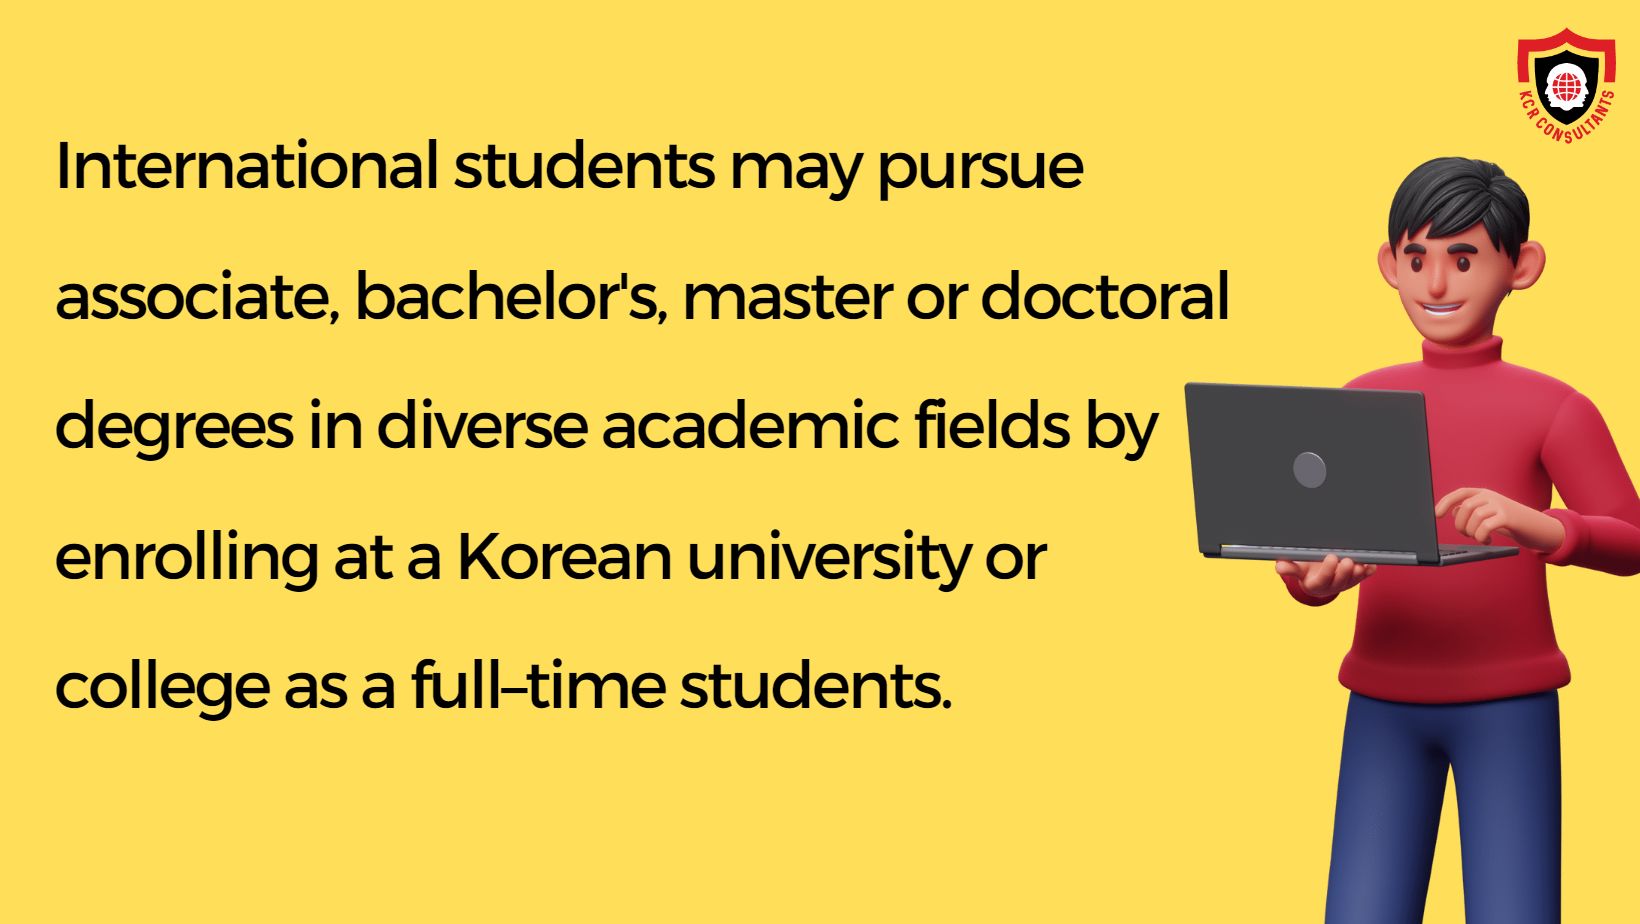 Is Korea a good place to study for international students